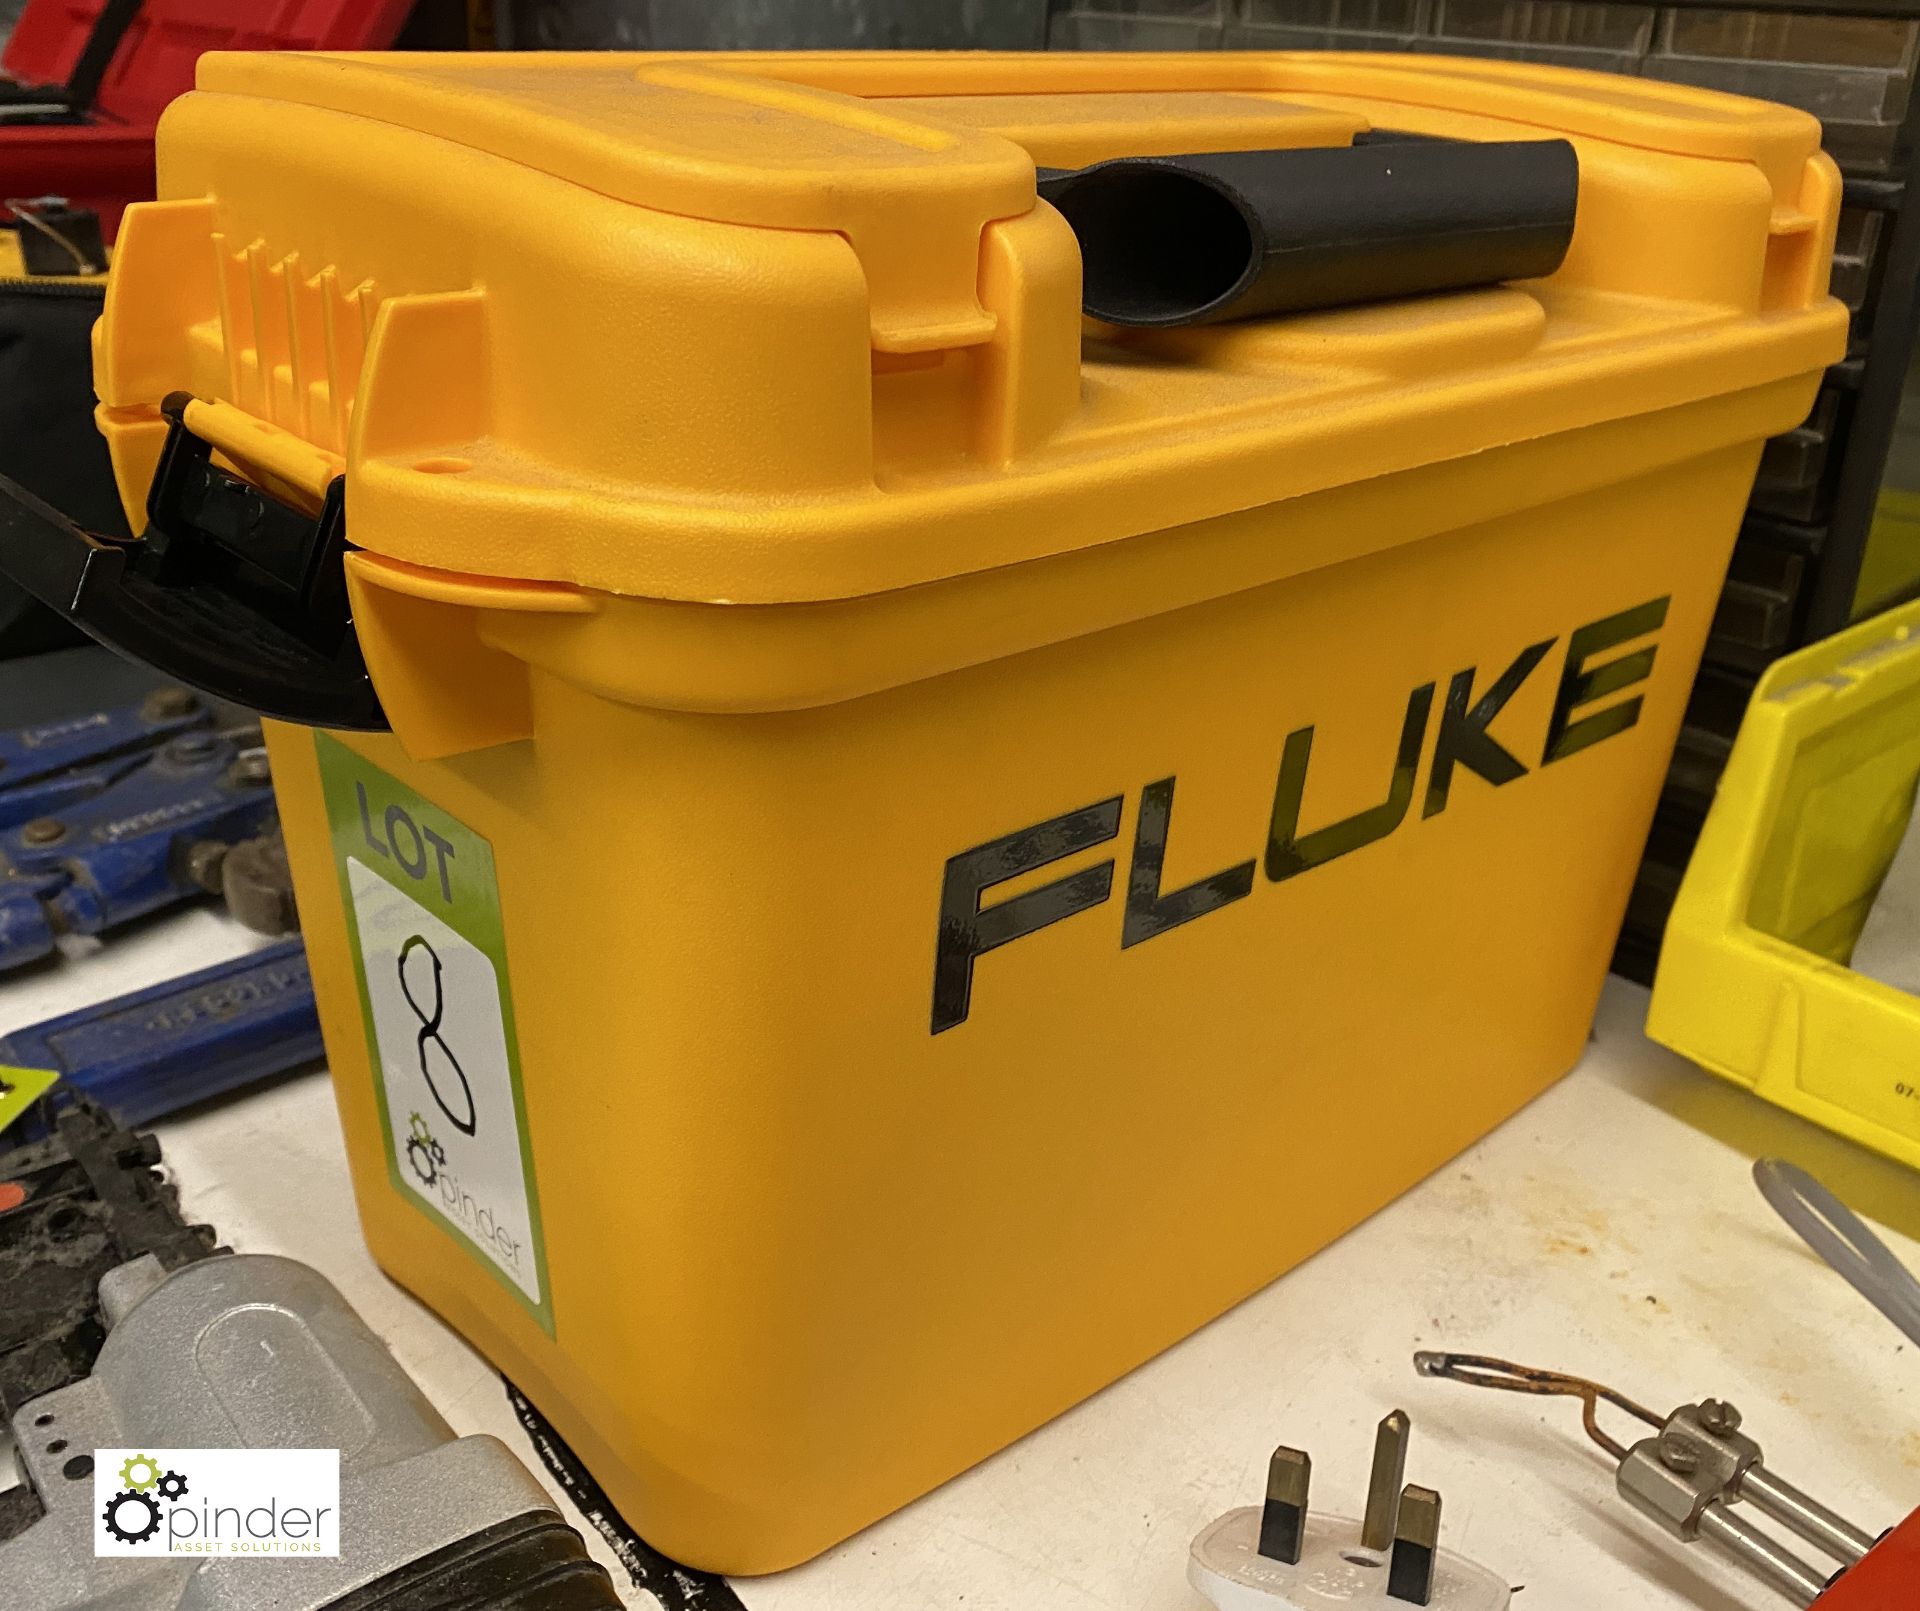 Fluke Ti9 Thermal Imager, with case (located in Maintenance Workshop 1) - Image 4 of 4